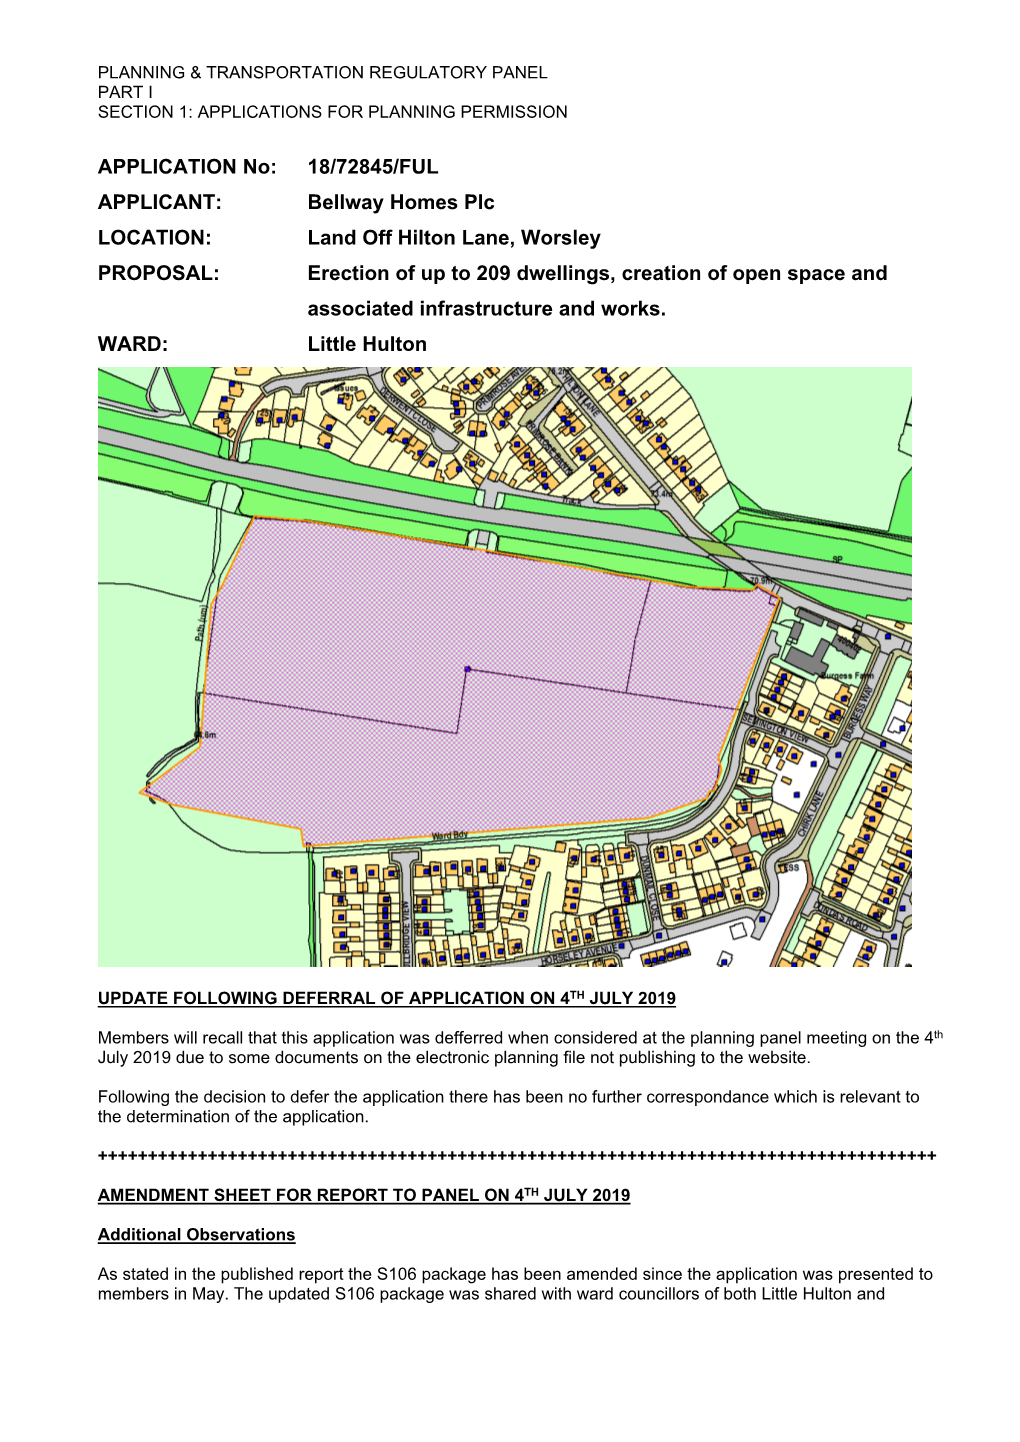 Bellway Homes Plc LOCATION: Land Off Hilton Lane, Worsley PROPOSAL: Erection of up to 209 Dwellings, Creation of Open Space and Associated Infrastructure and Works